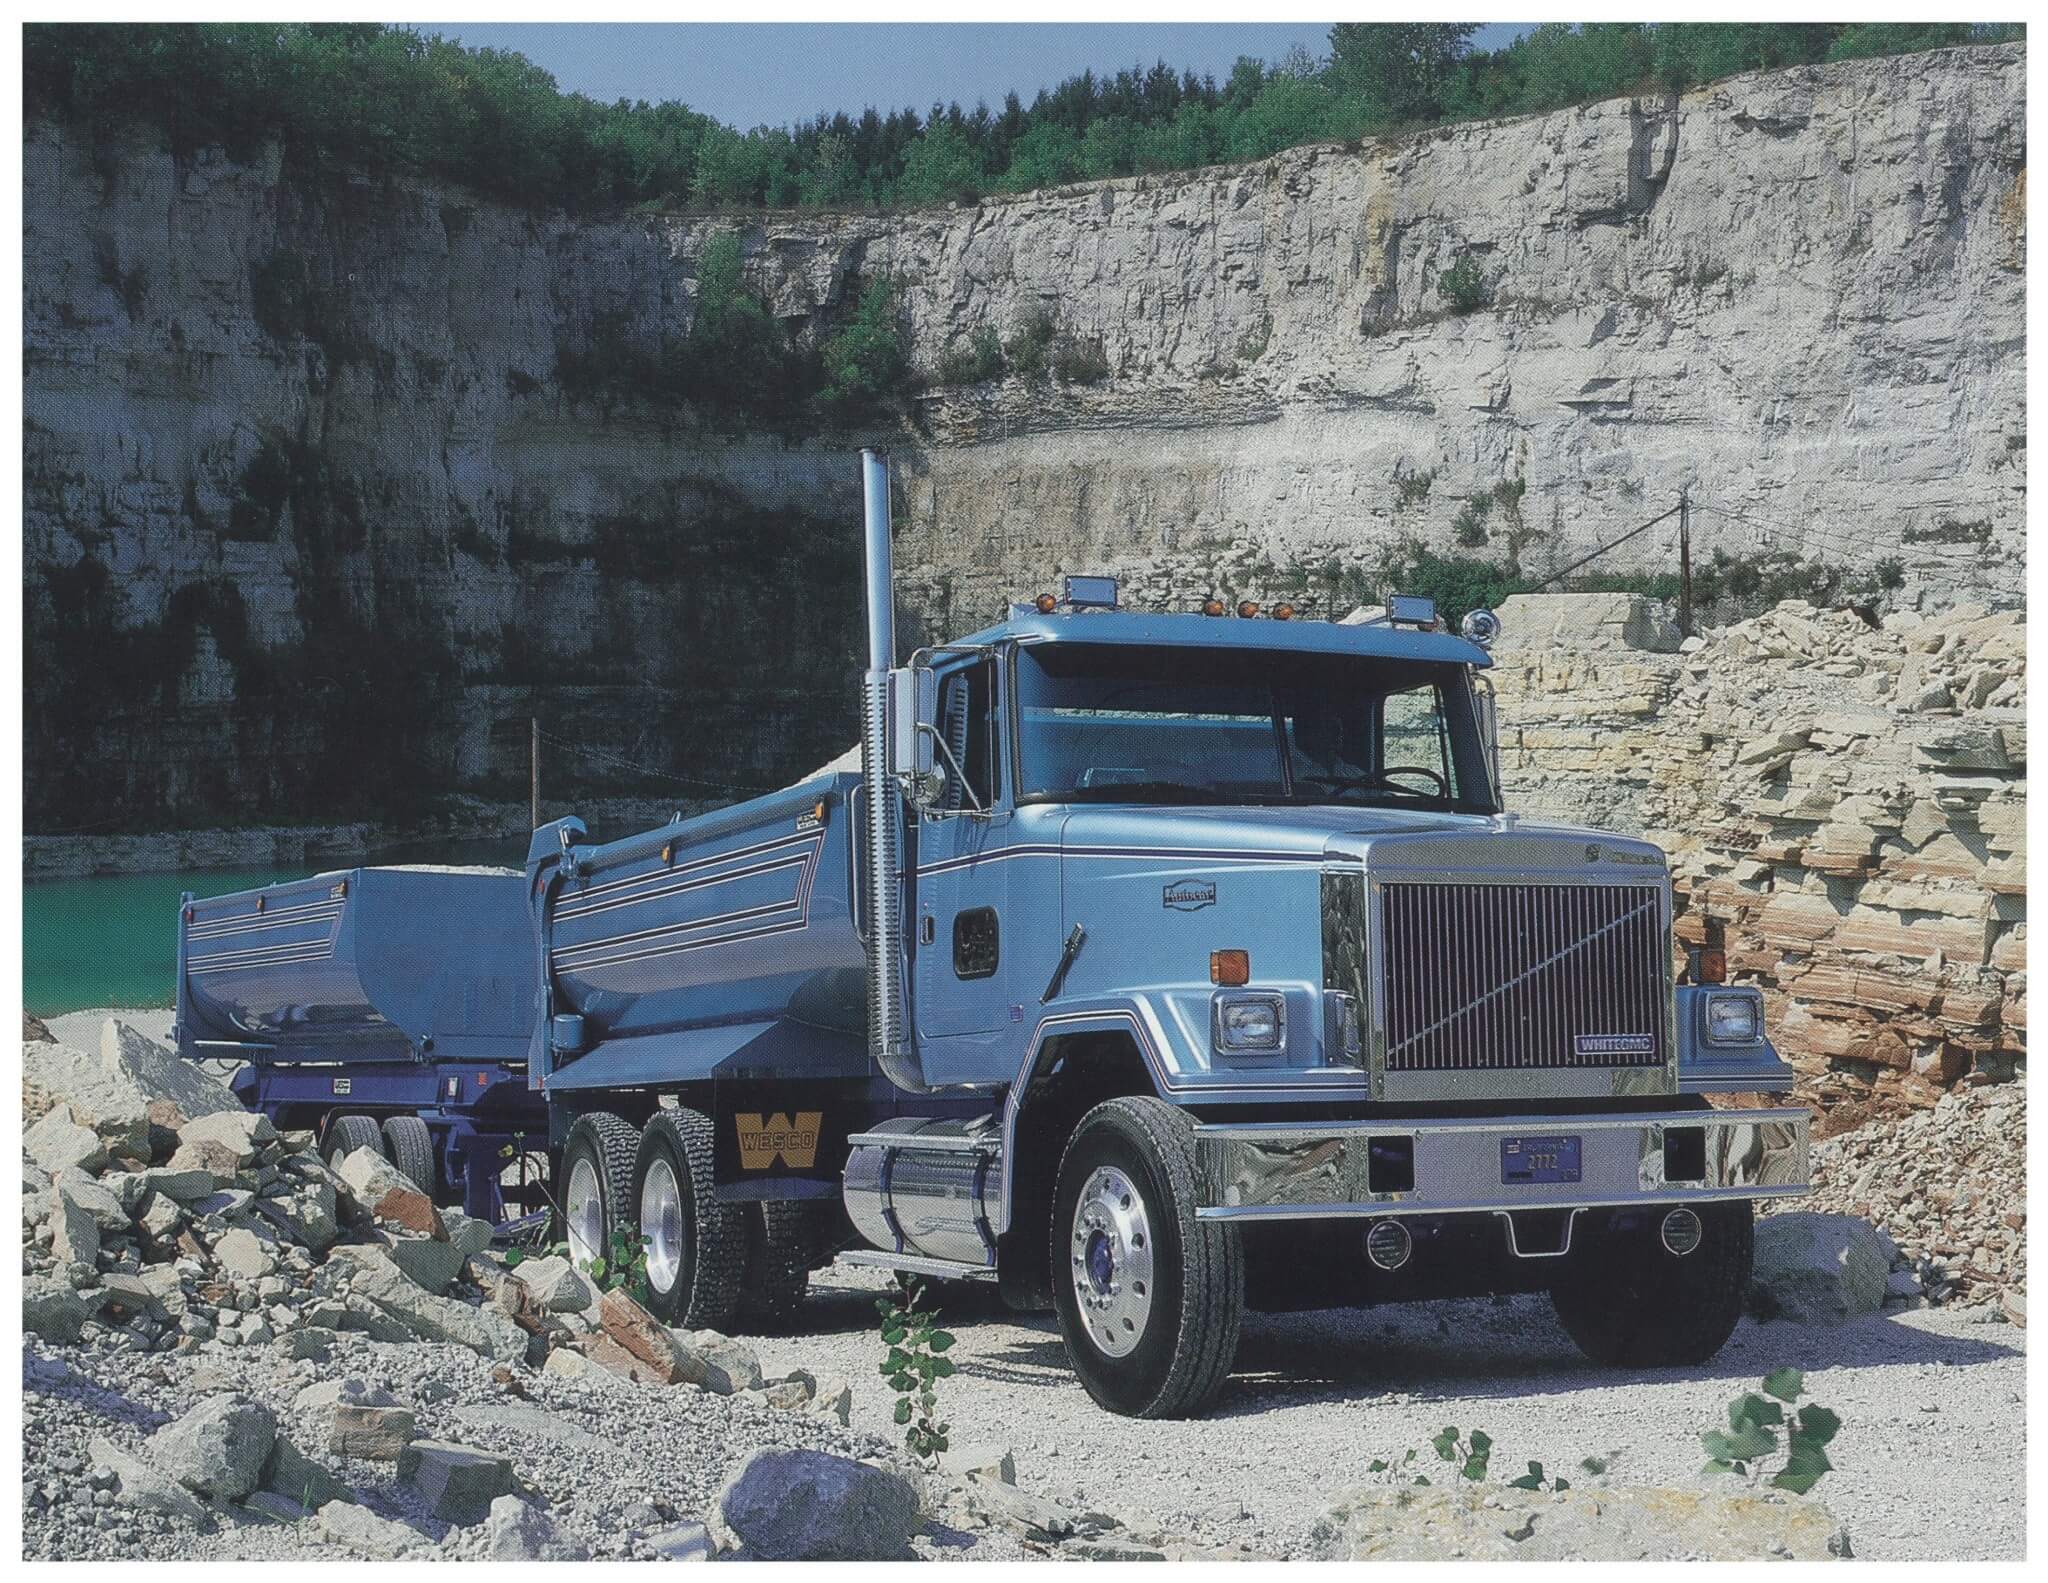 Volvo purchased the total assets of White Motors and that included Autocar. GM’s heavy-duty truck line was later added. After the brand component merger, this fine example of a White/GMC/Autocar diesel conventional was one result.